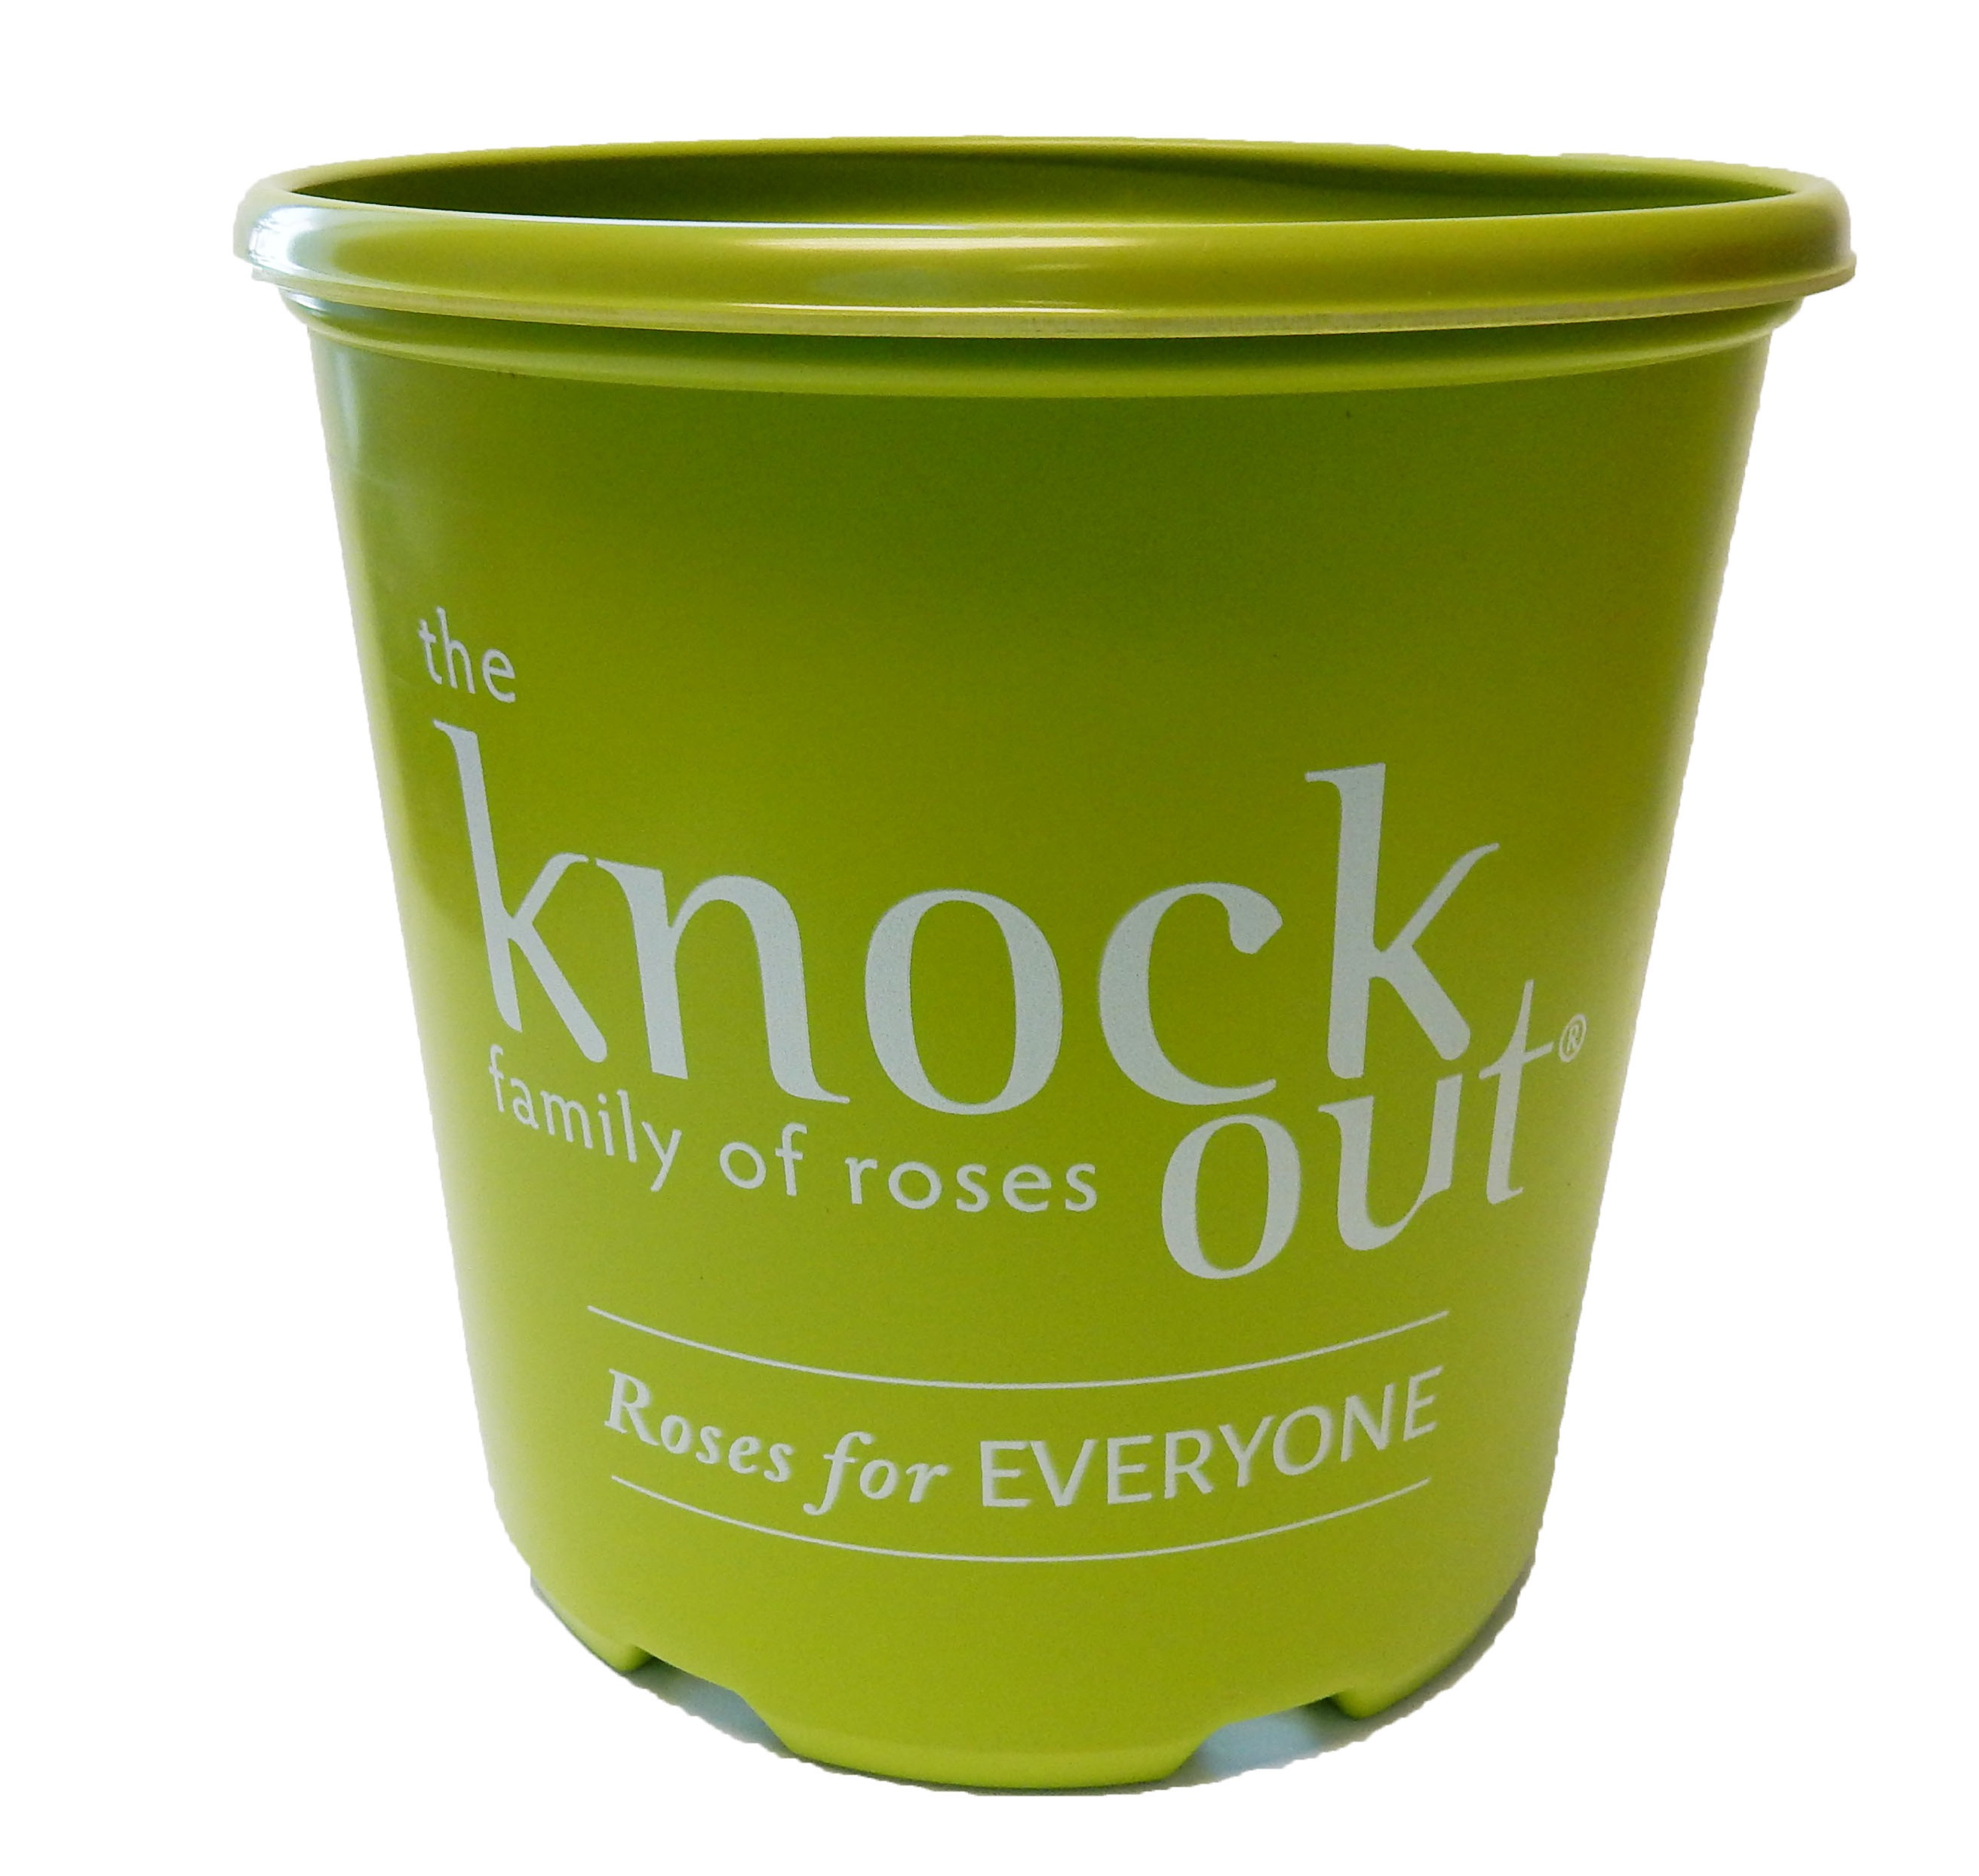 3.00 Gallon Knockout Rose Thermoformed Nursery Pot 44/cs - Containers